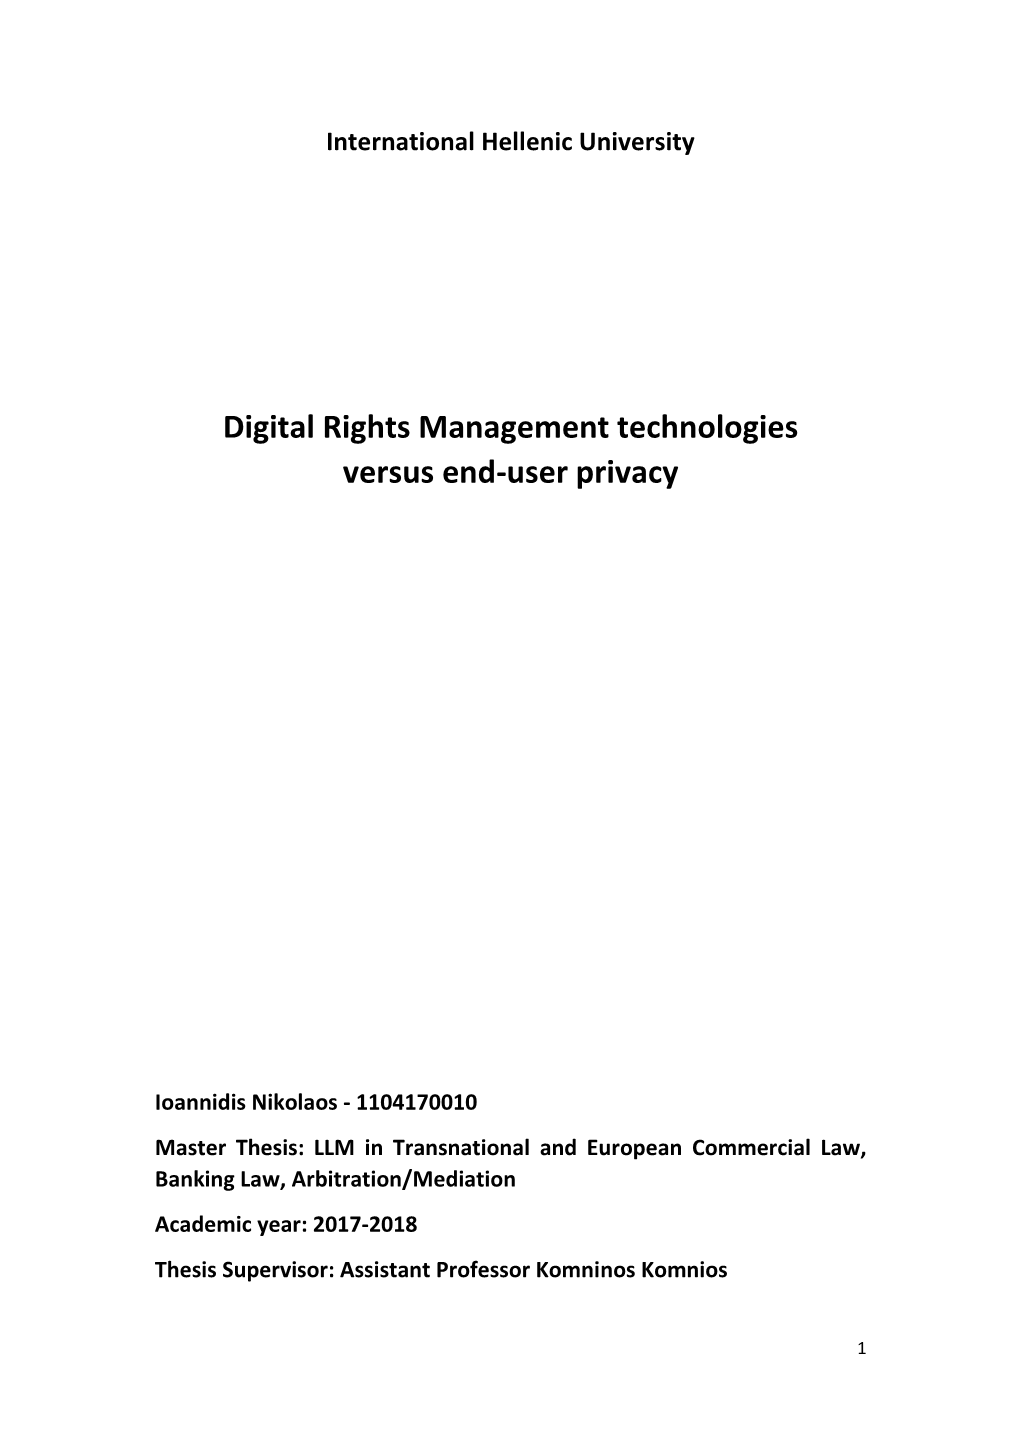 Digital Rights Management Technologies Versus End-User Privacy